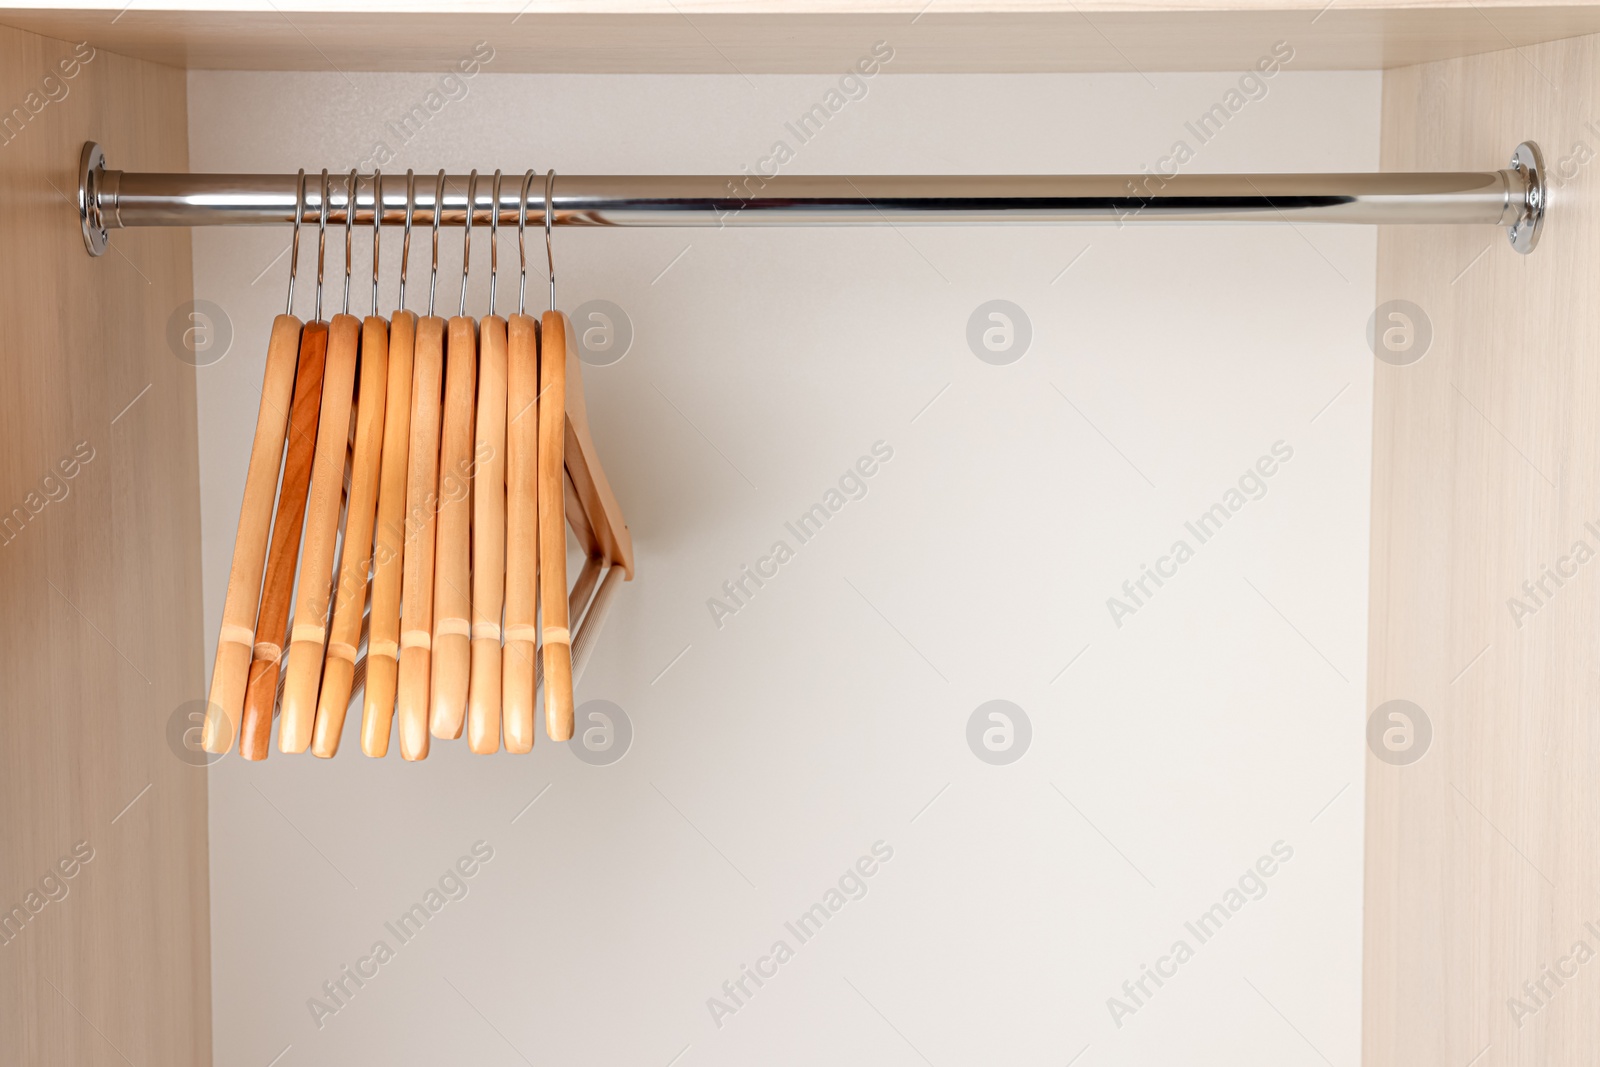 Photo of Set of clothes hangers on wardrobe rail. Space for text